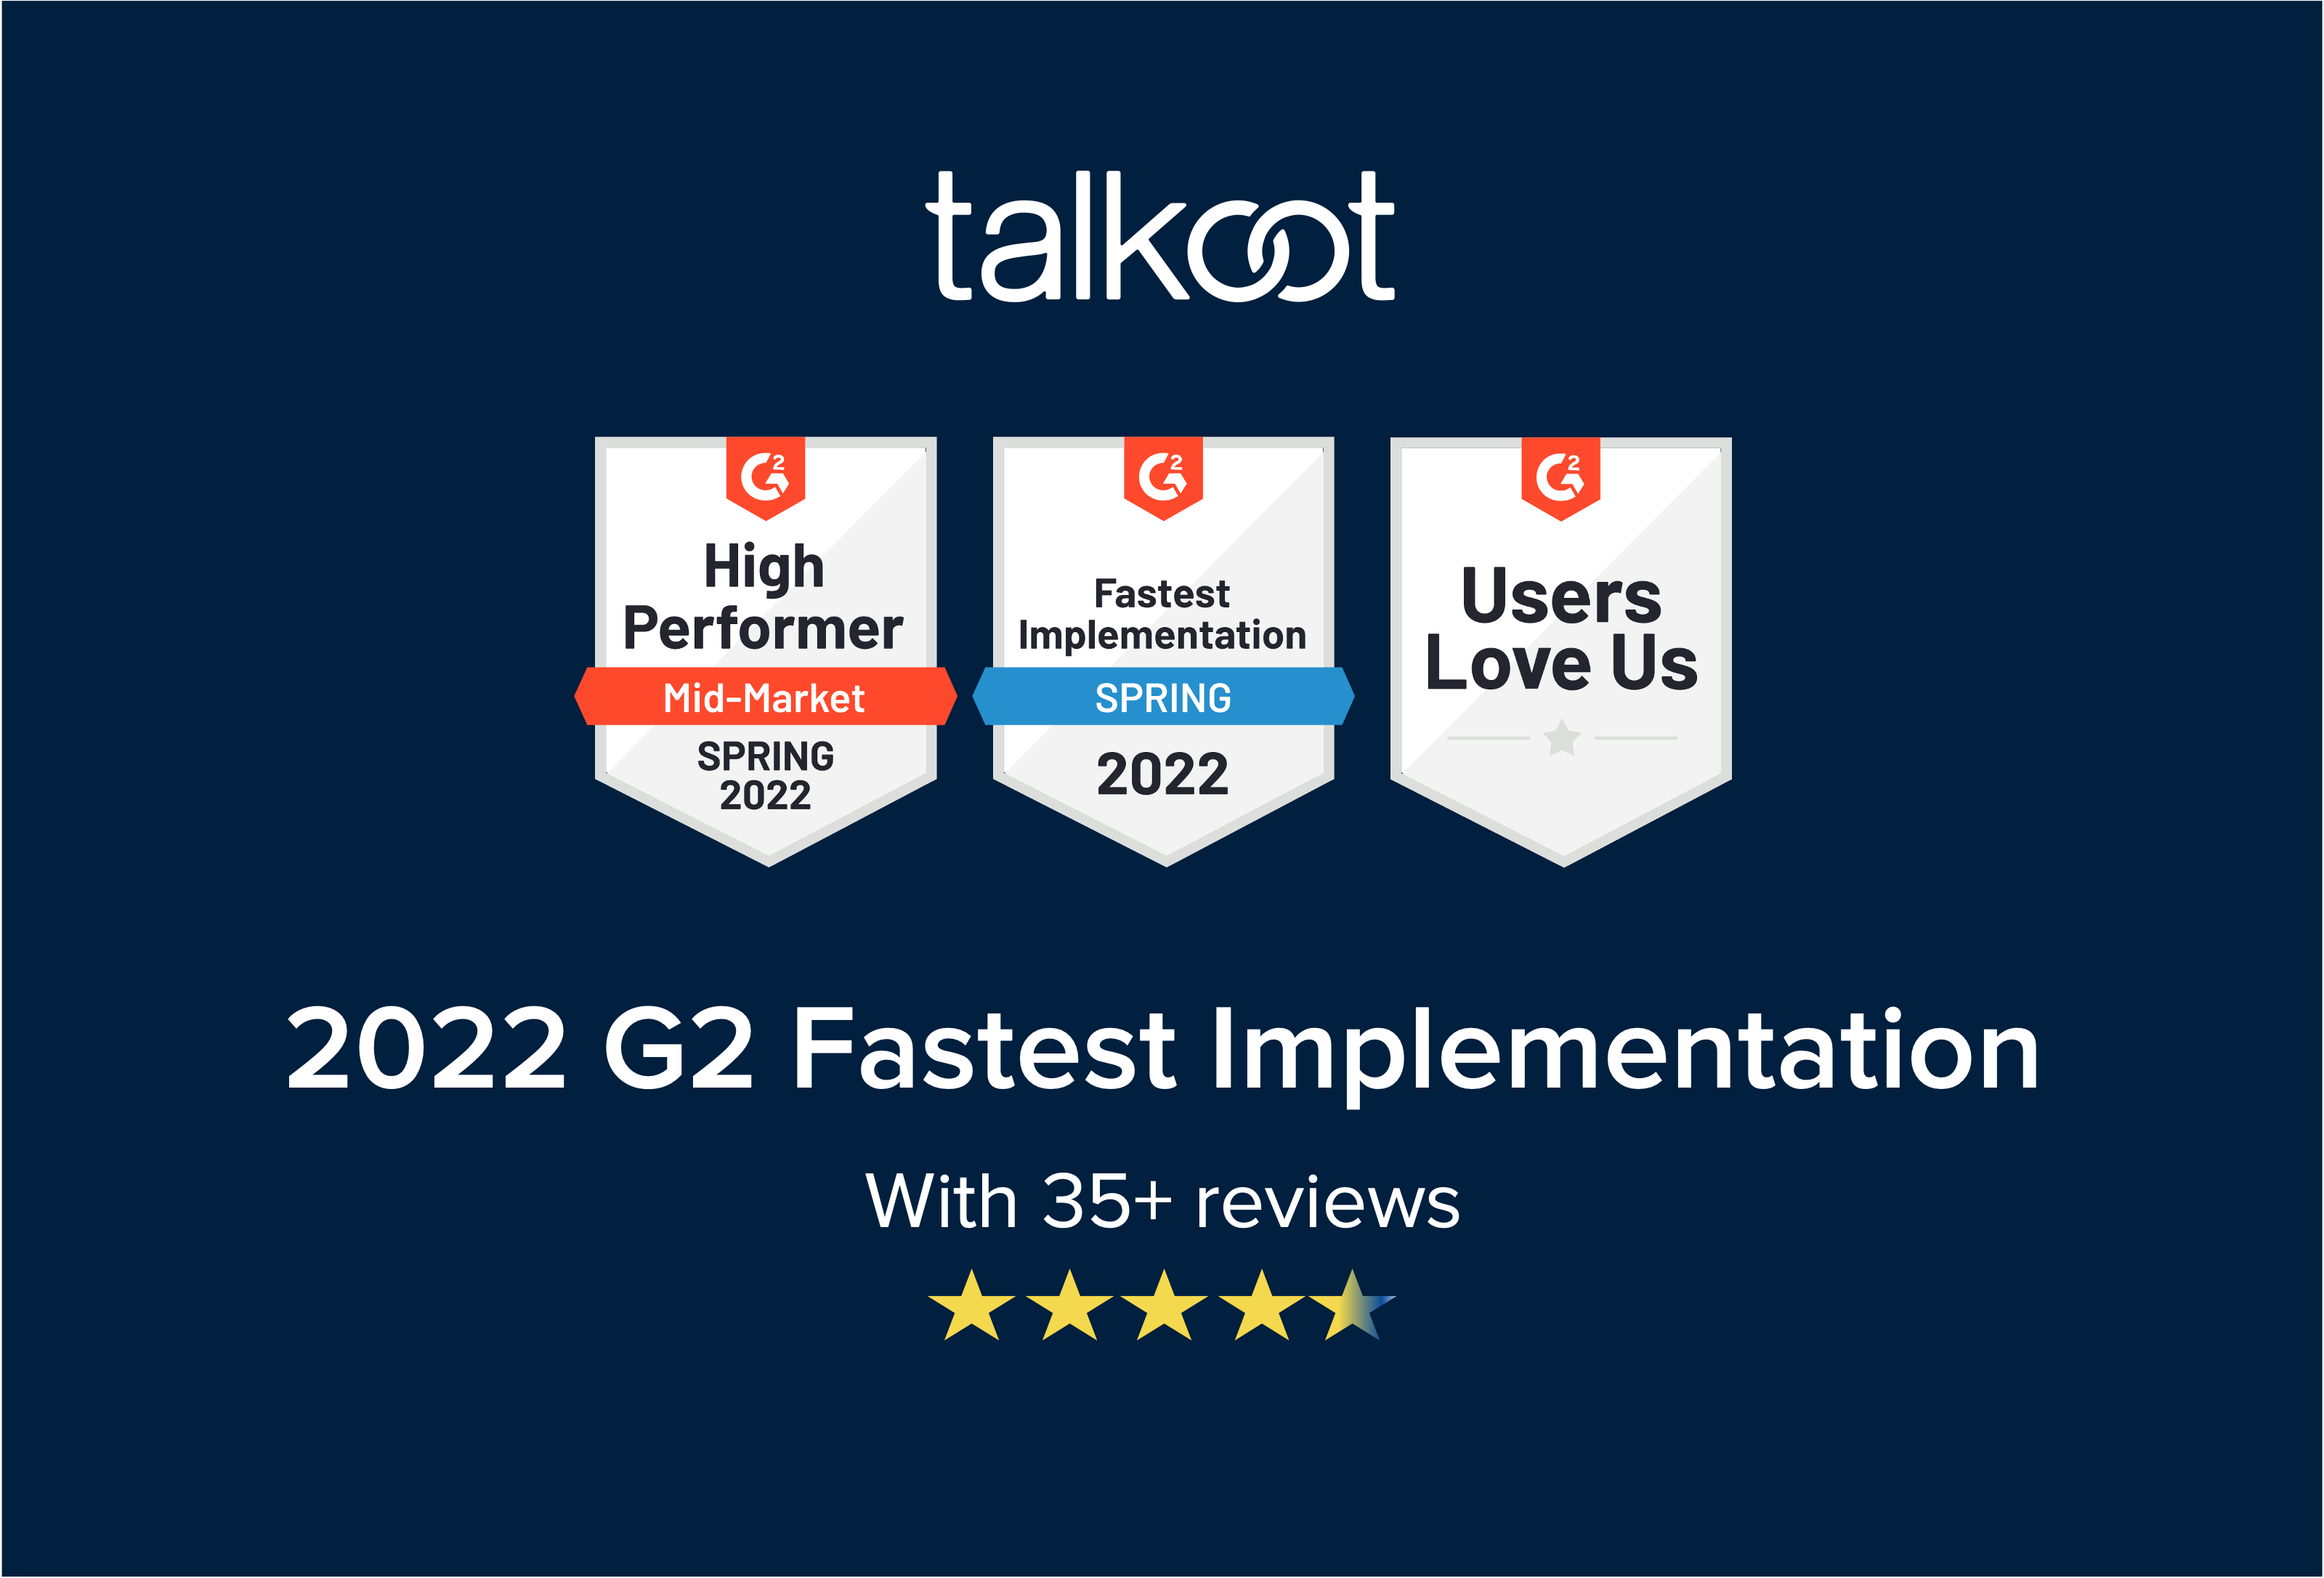 G2 names Talkoot High Performer